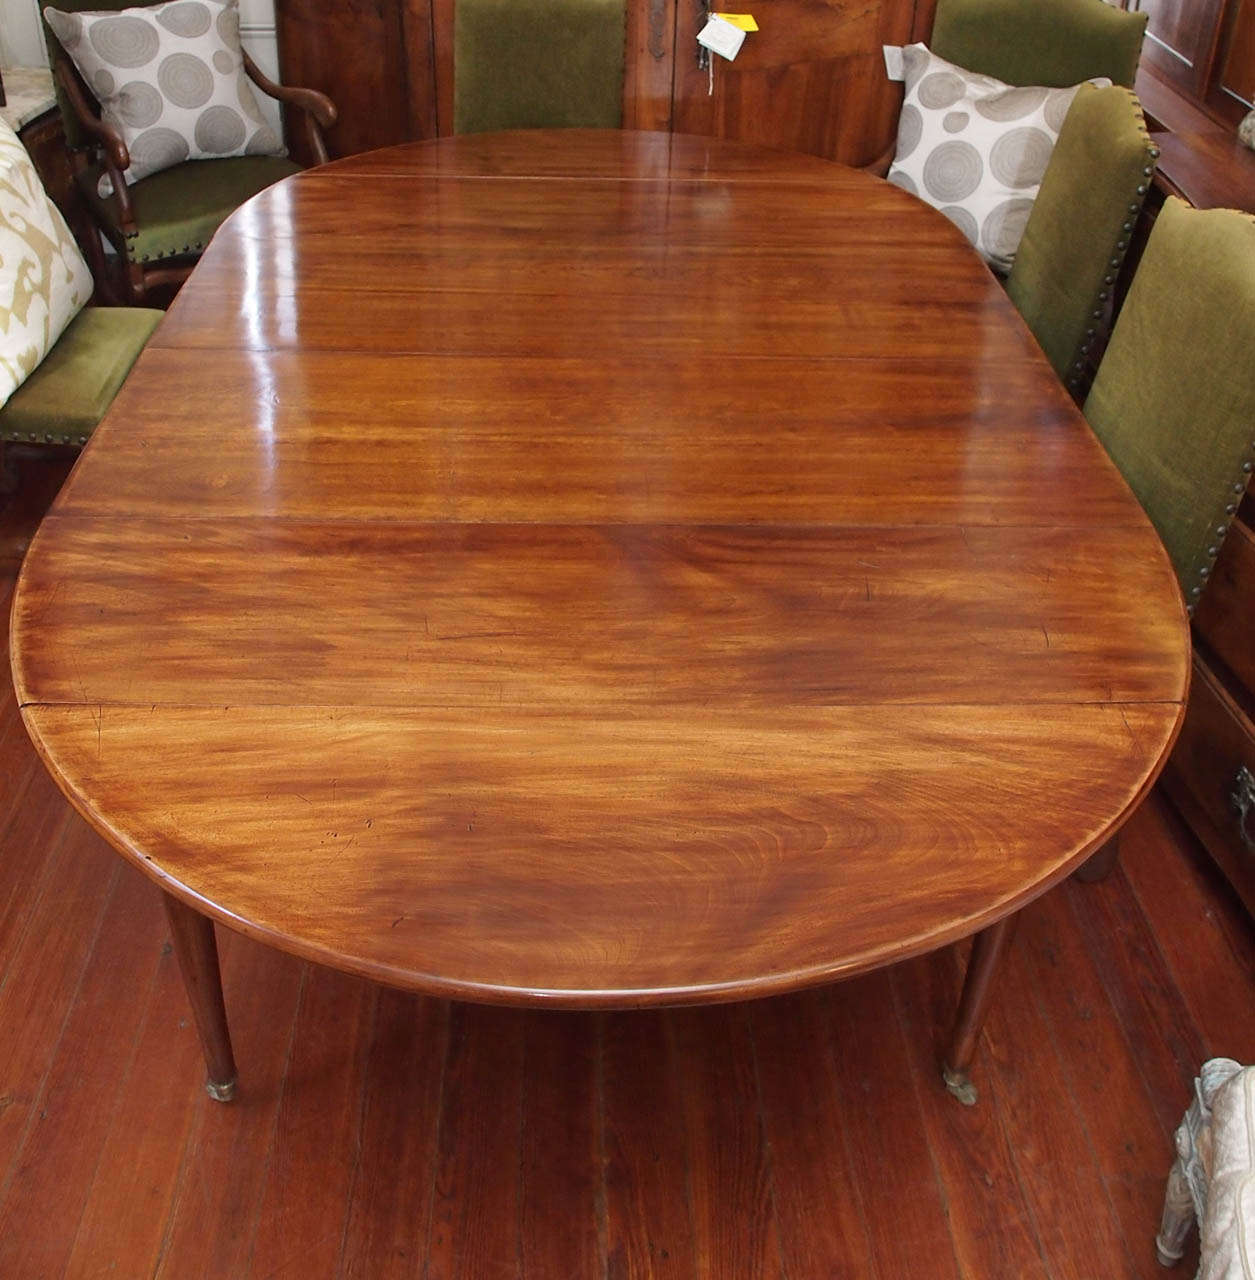 18th century walnut directoire dining table. It comes with 3 leaves. Each leaf is 19